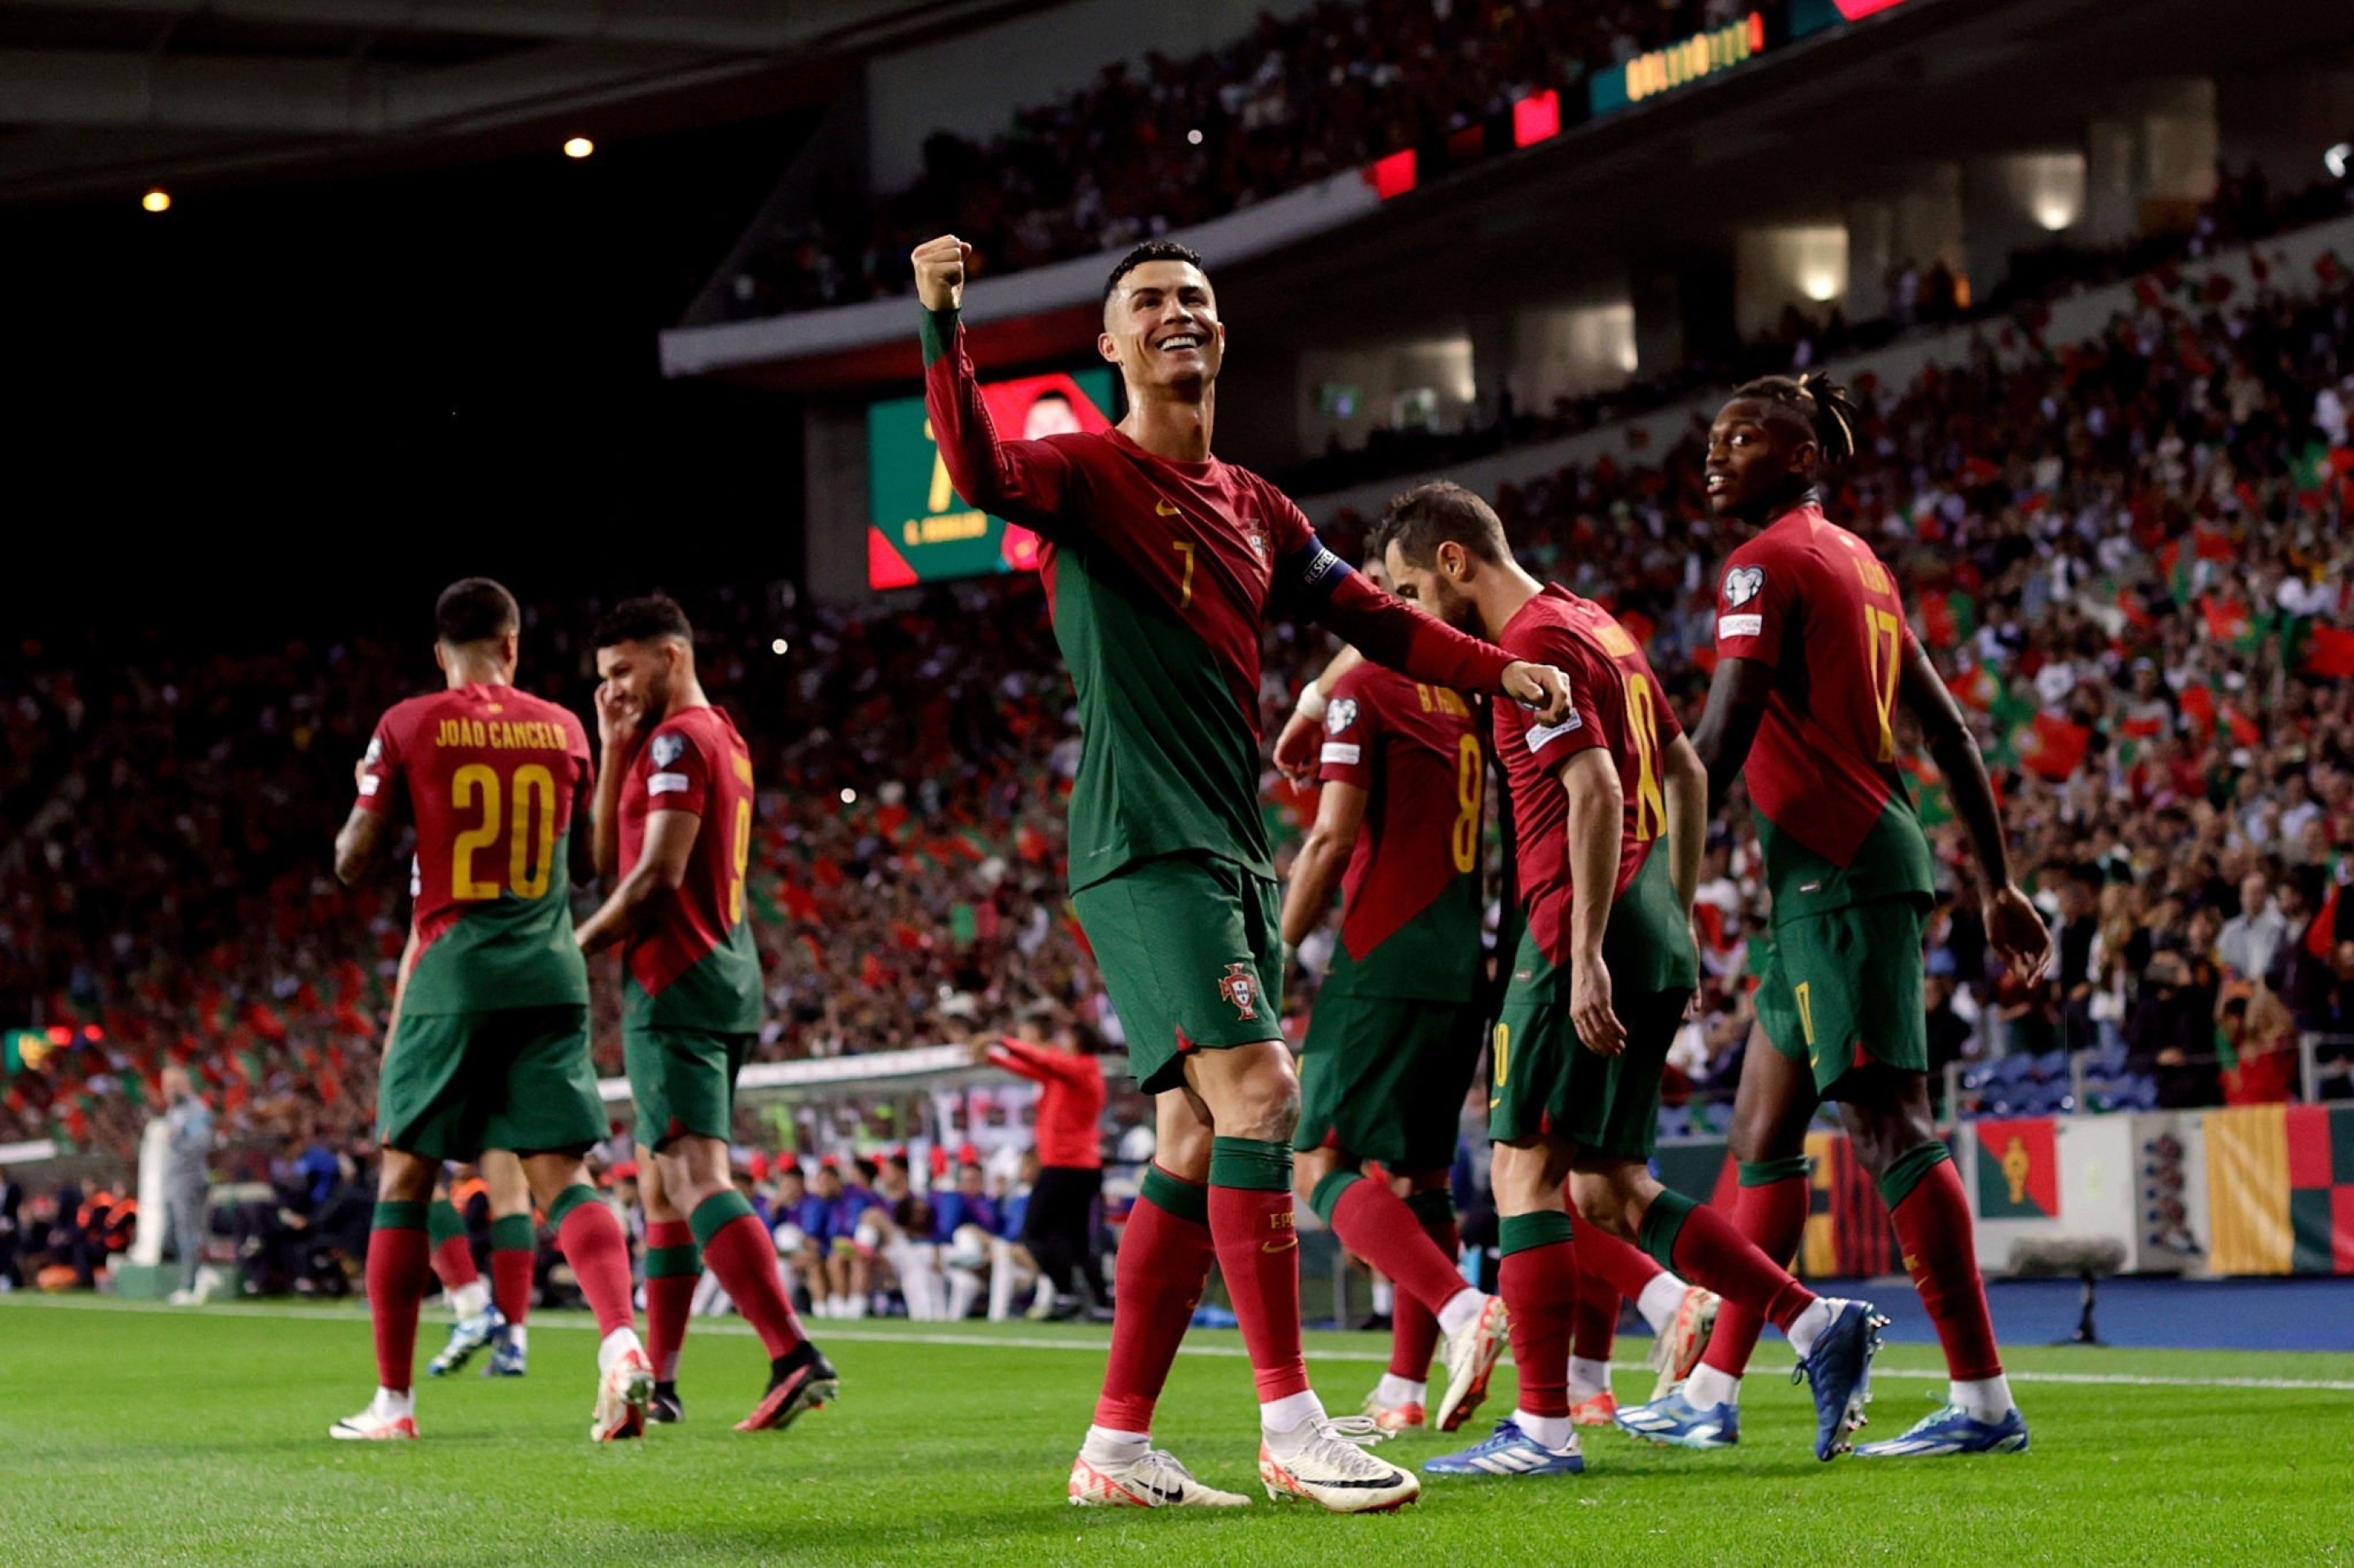 Portugal vs Iceland - POR vs ISL - Cristiano Ronaldo and Co. are determined to end the Euro Qualifiers campaign on a 100% 10-game win rate